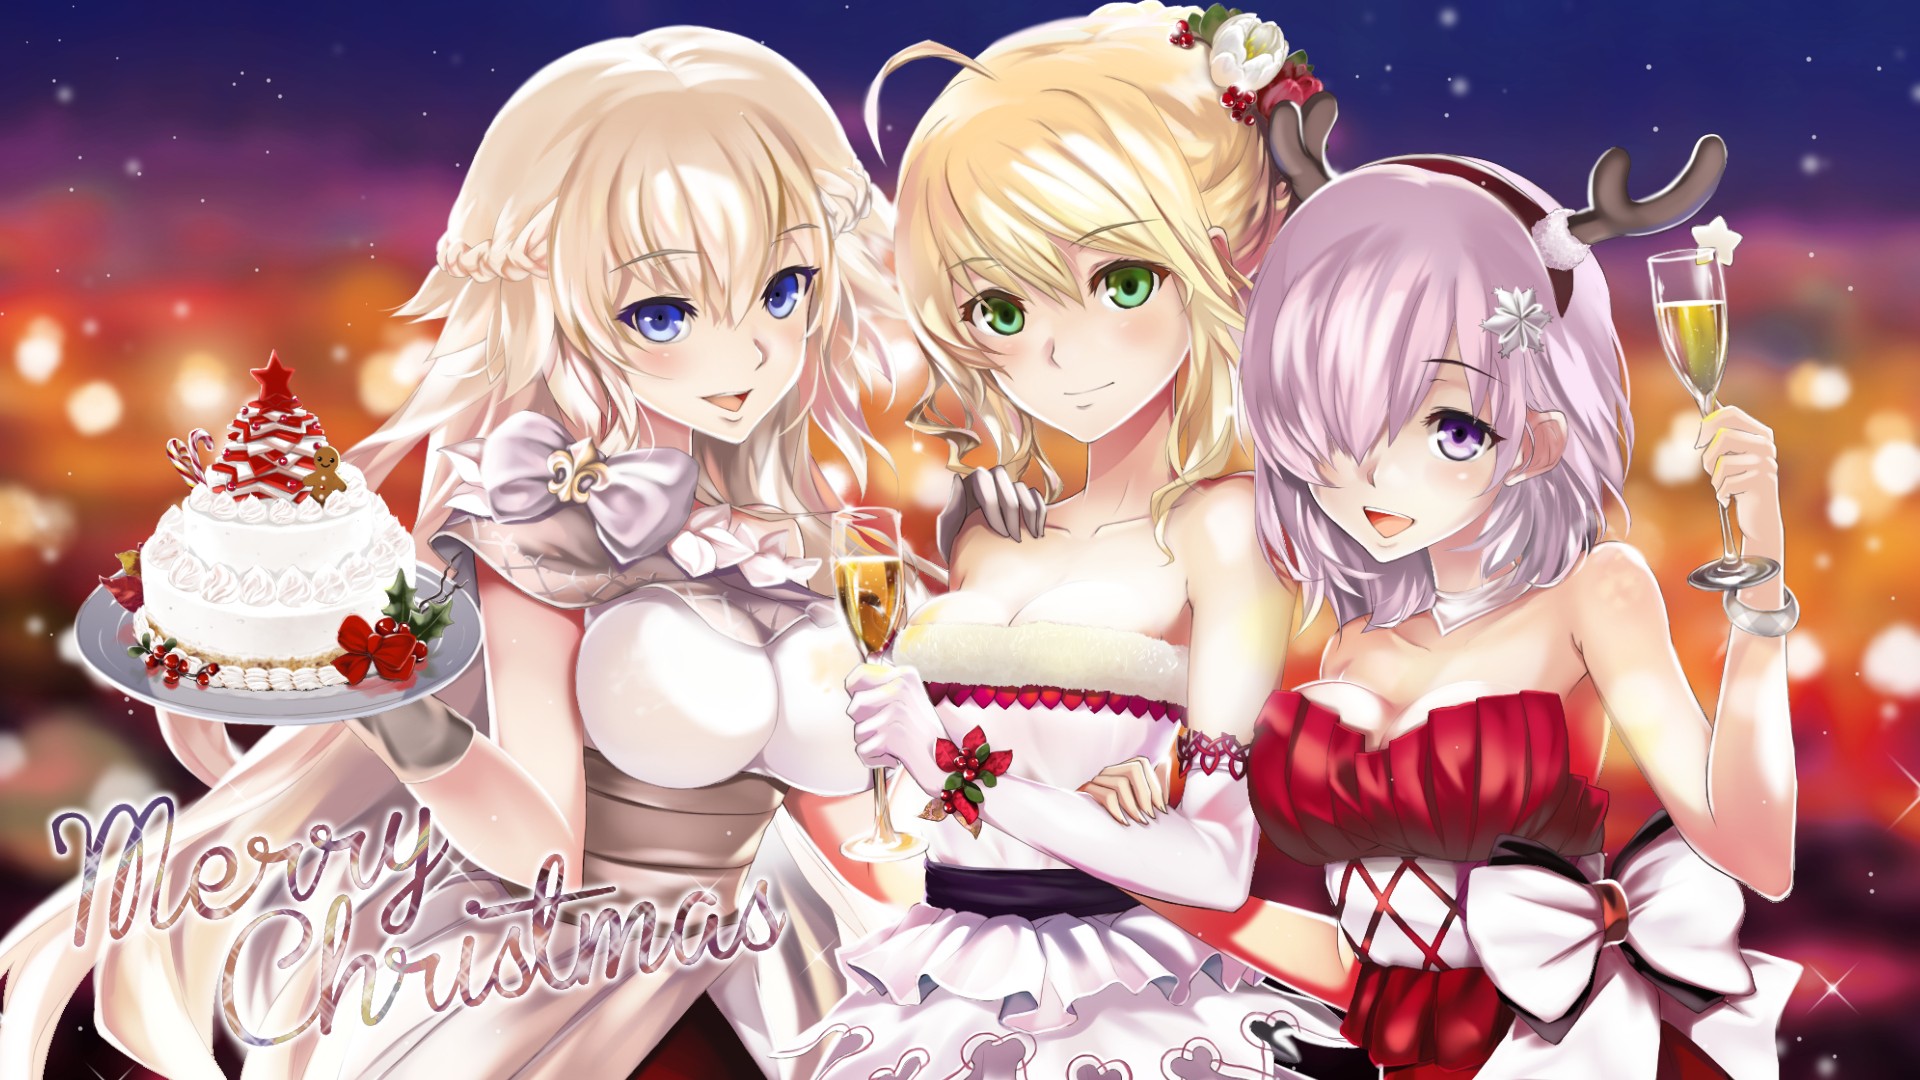 Anime 1920x1080 Christmas anime girls Fate/Grand Order Saber Fate series Mash Kyrielight Artoria Pendragon Jeanne d'Arc (Fate) dress cake boobs big boobs food sweets blue eyes green eyes hair in face curvy women trio anime holiday looking at viewer blonde purple hair